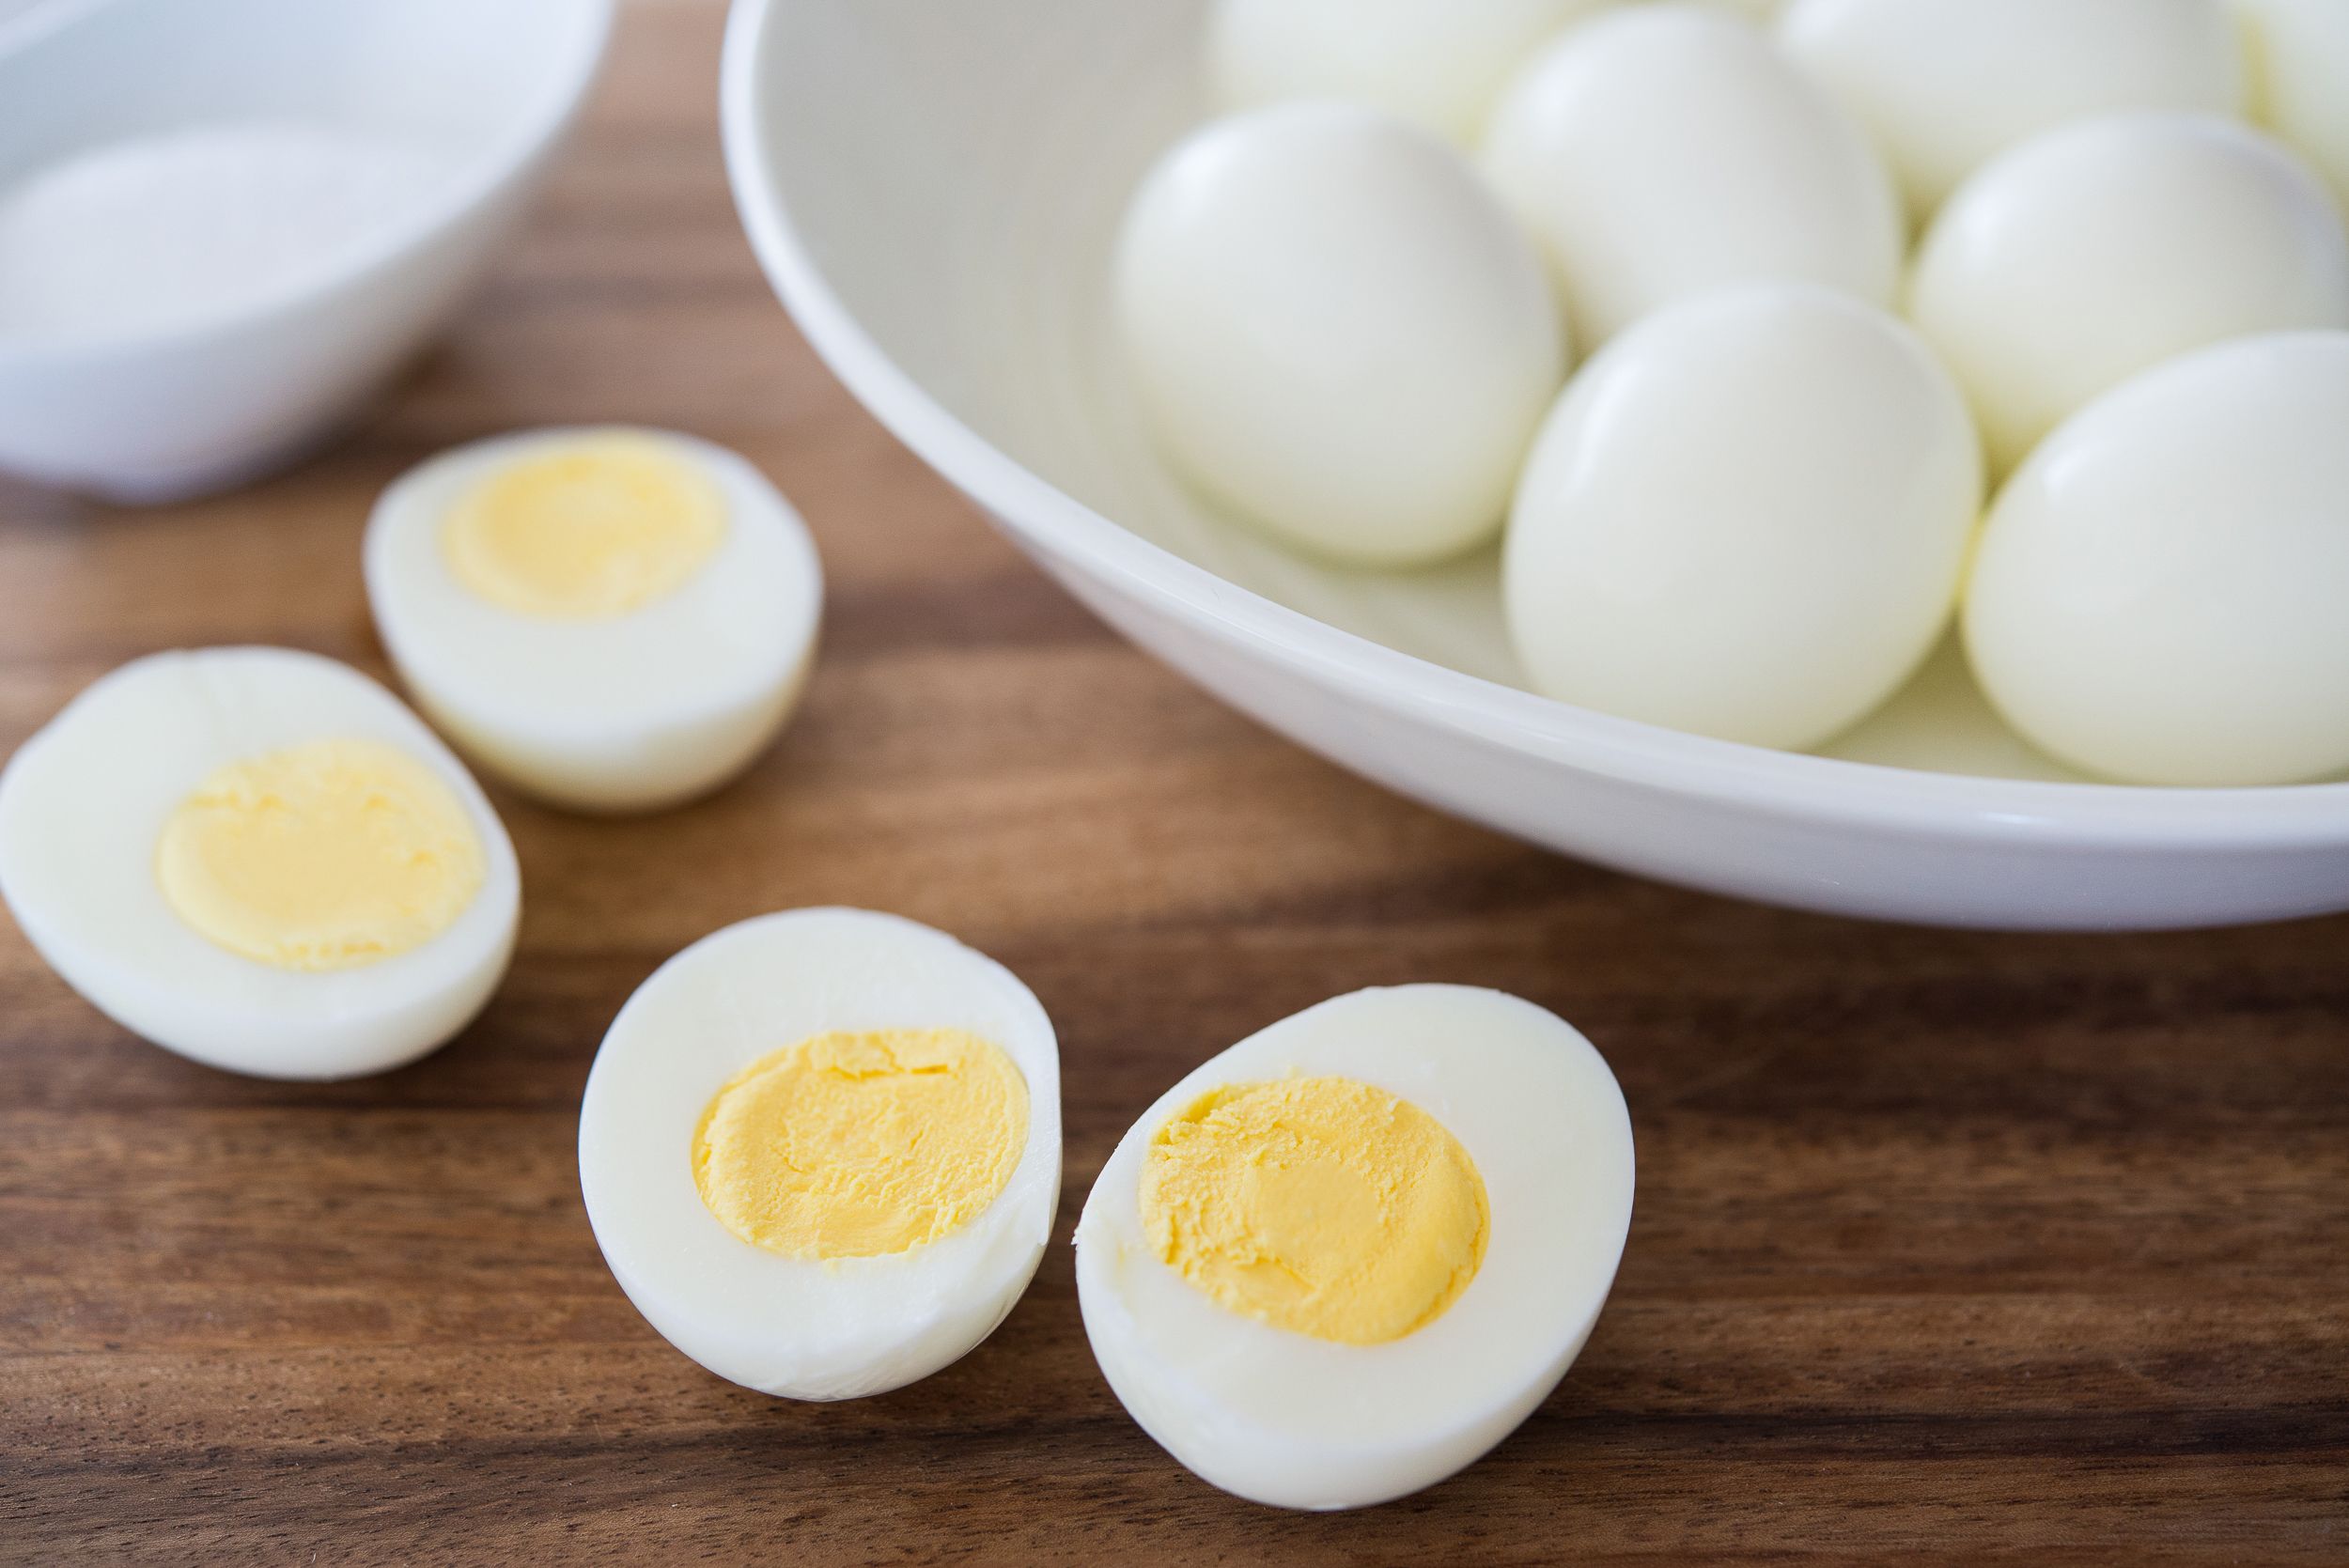 https://hips.hearstapps.com/thepioneerwoman/wp-content/uploads/2015/10/perfect-easy-to-peel-hard-boiled-eggs-001.jpg